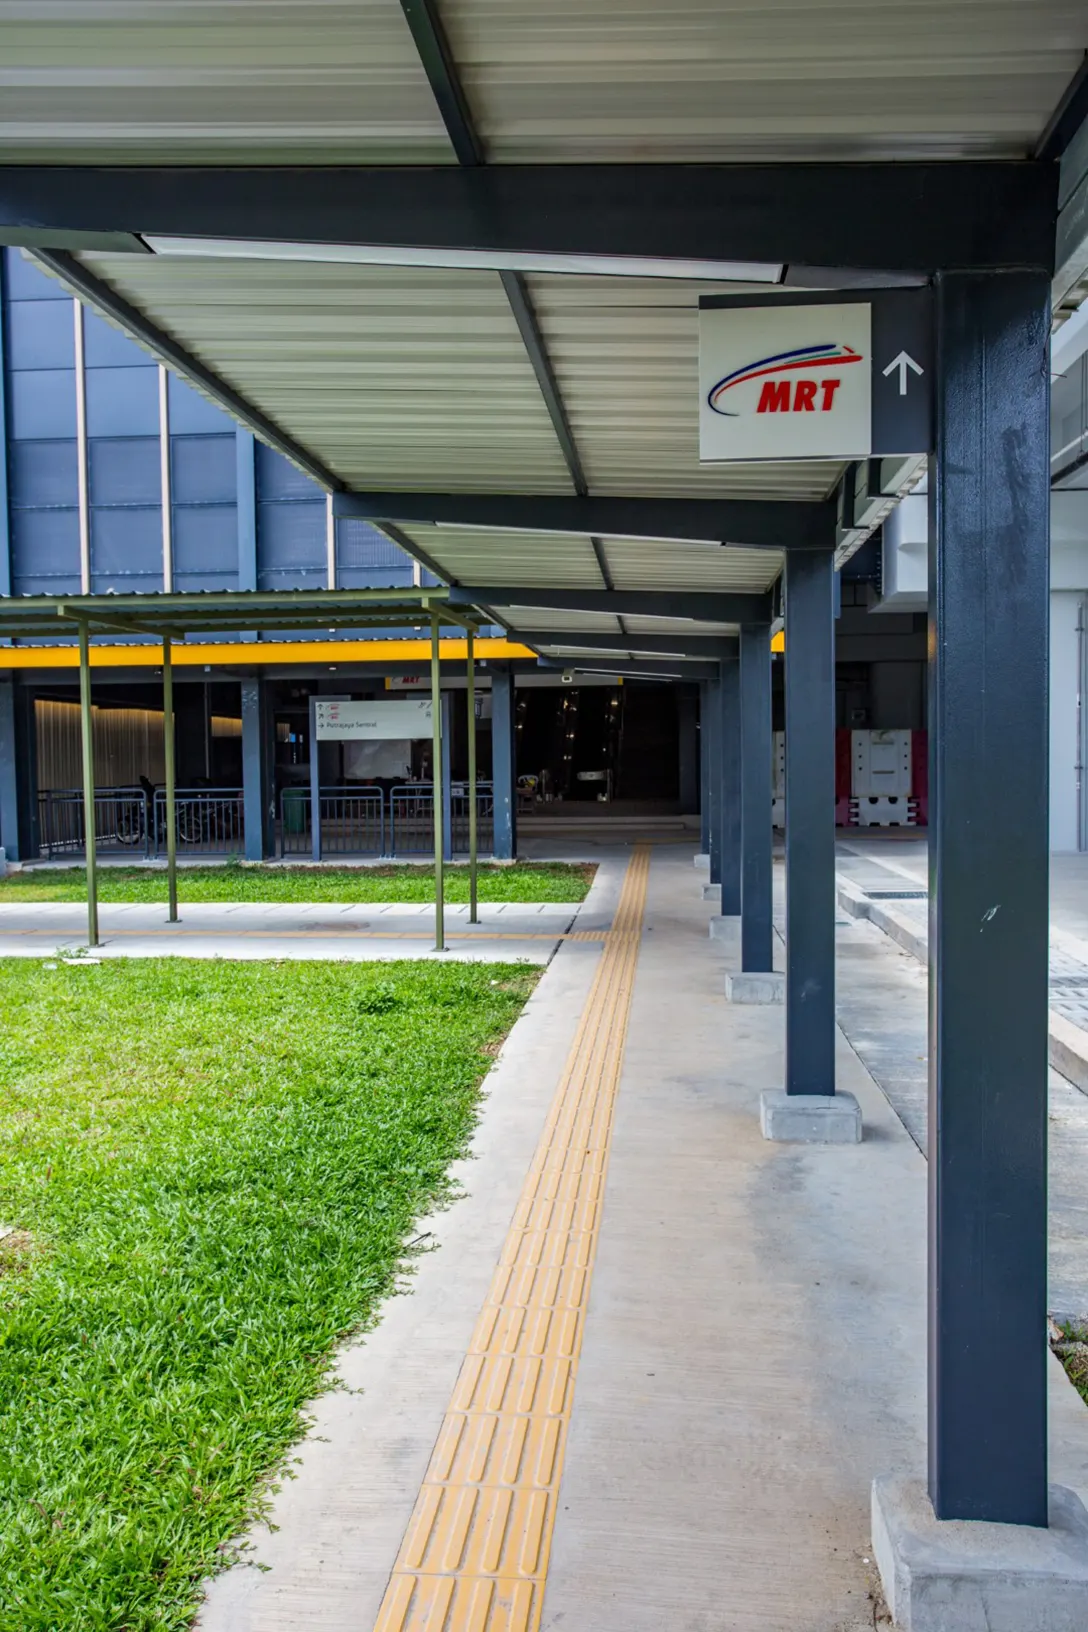 Additional covered walkway completed at the Putrajaya Sentral MRT Station.